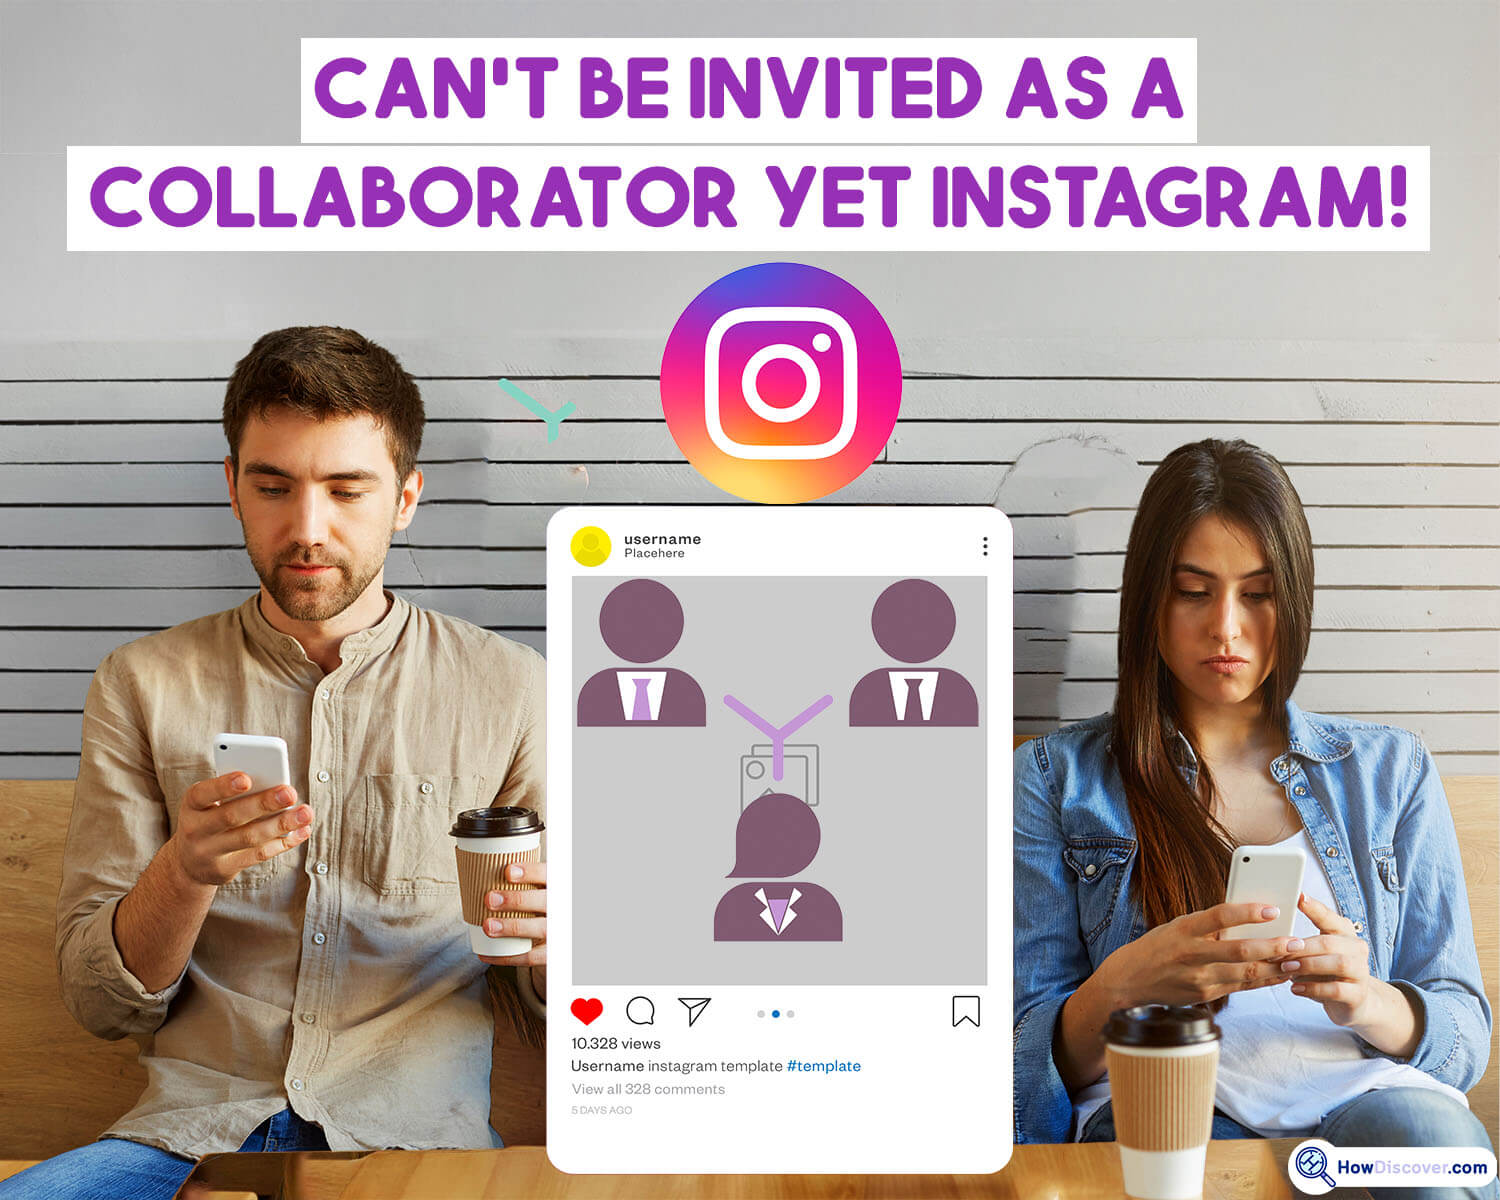 Can’t Be Invited as a Collaborator Yet Instagram